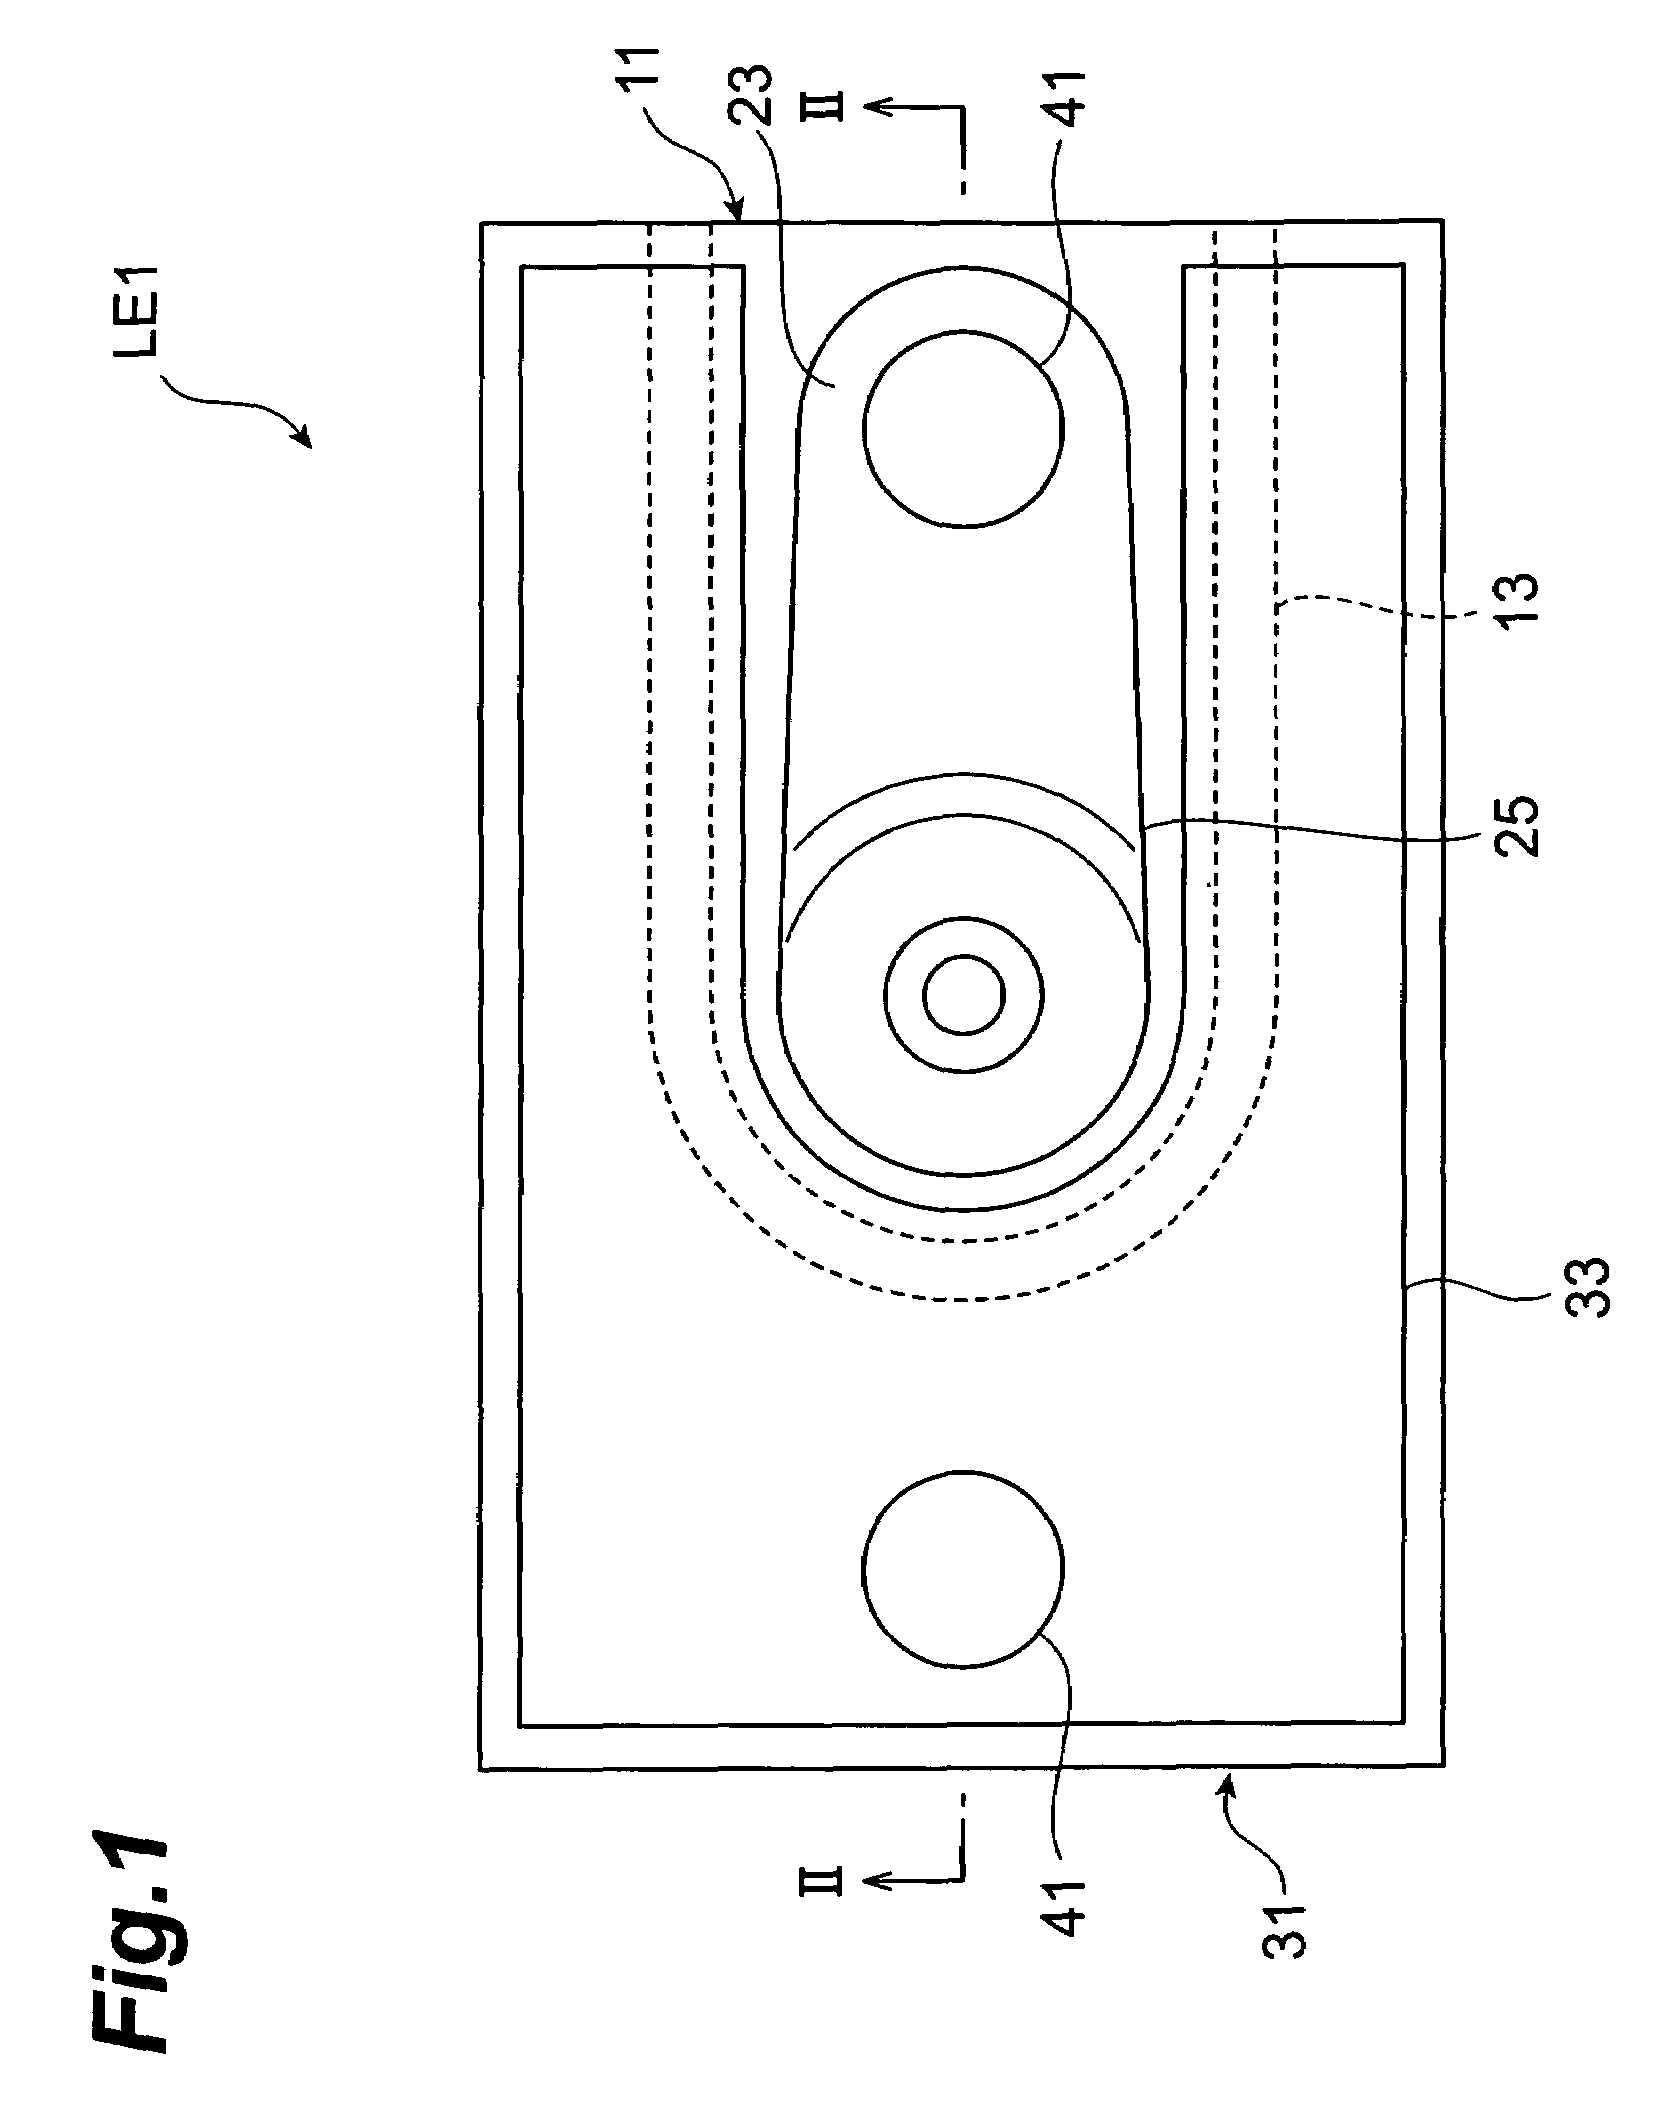 Semiconductor light-emitting device and its manufacturing method